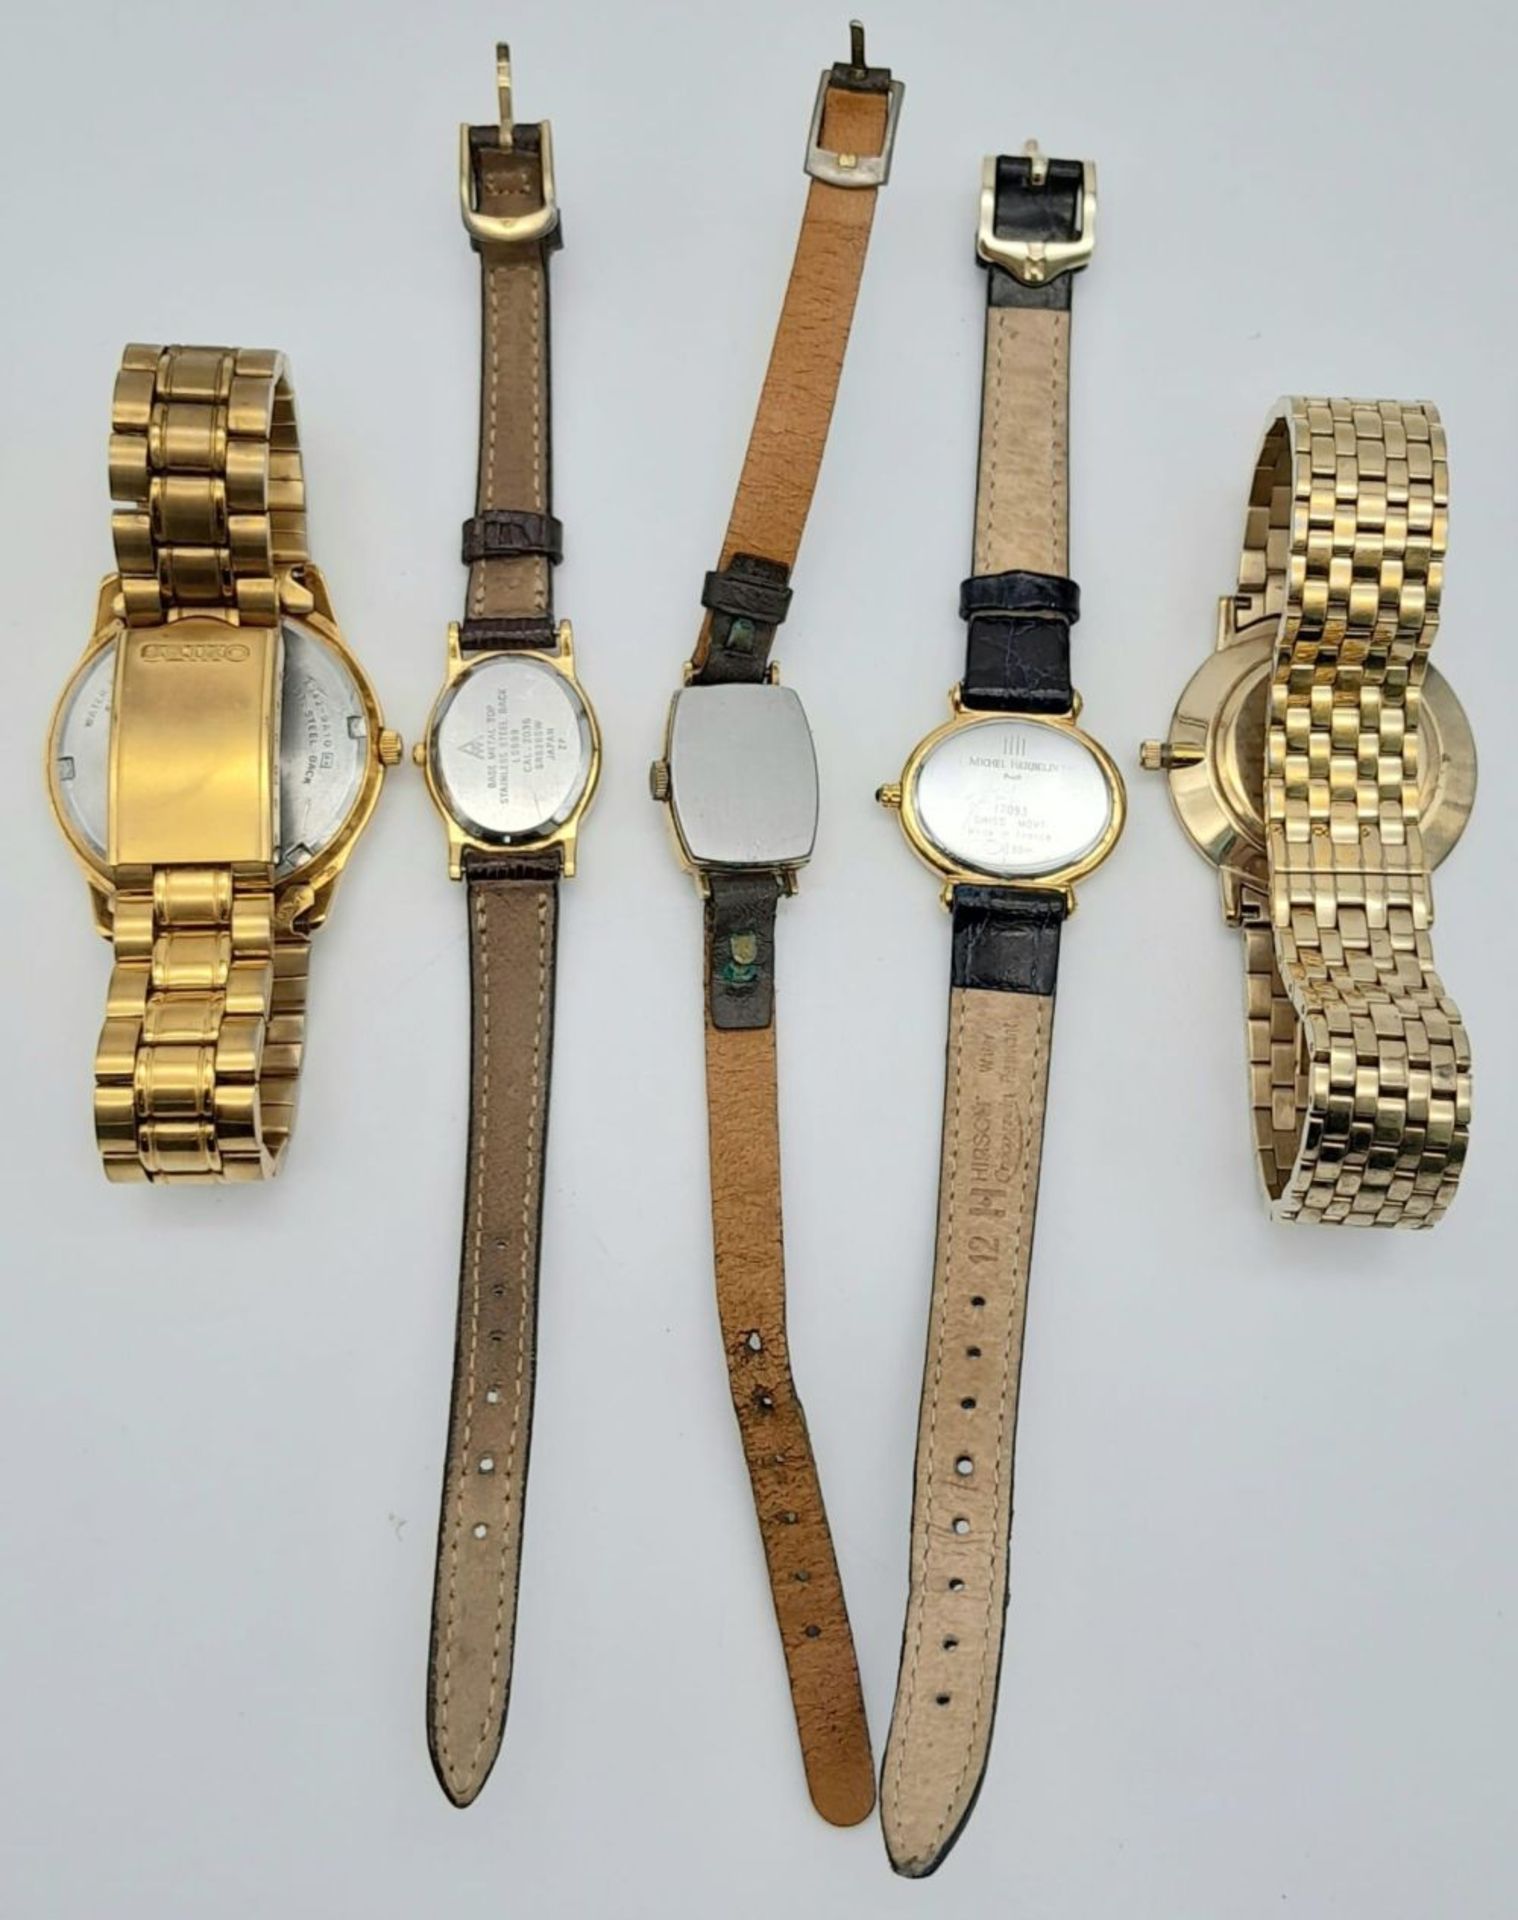 A collection of vintage watches. Featuring a Ladies Ingersoll, Michael Berlin and Accurist. and a - Image 3 of 9